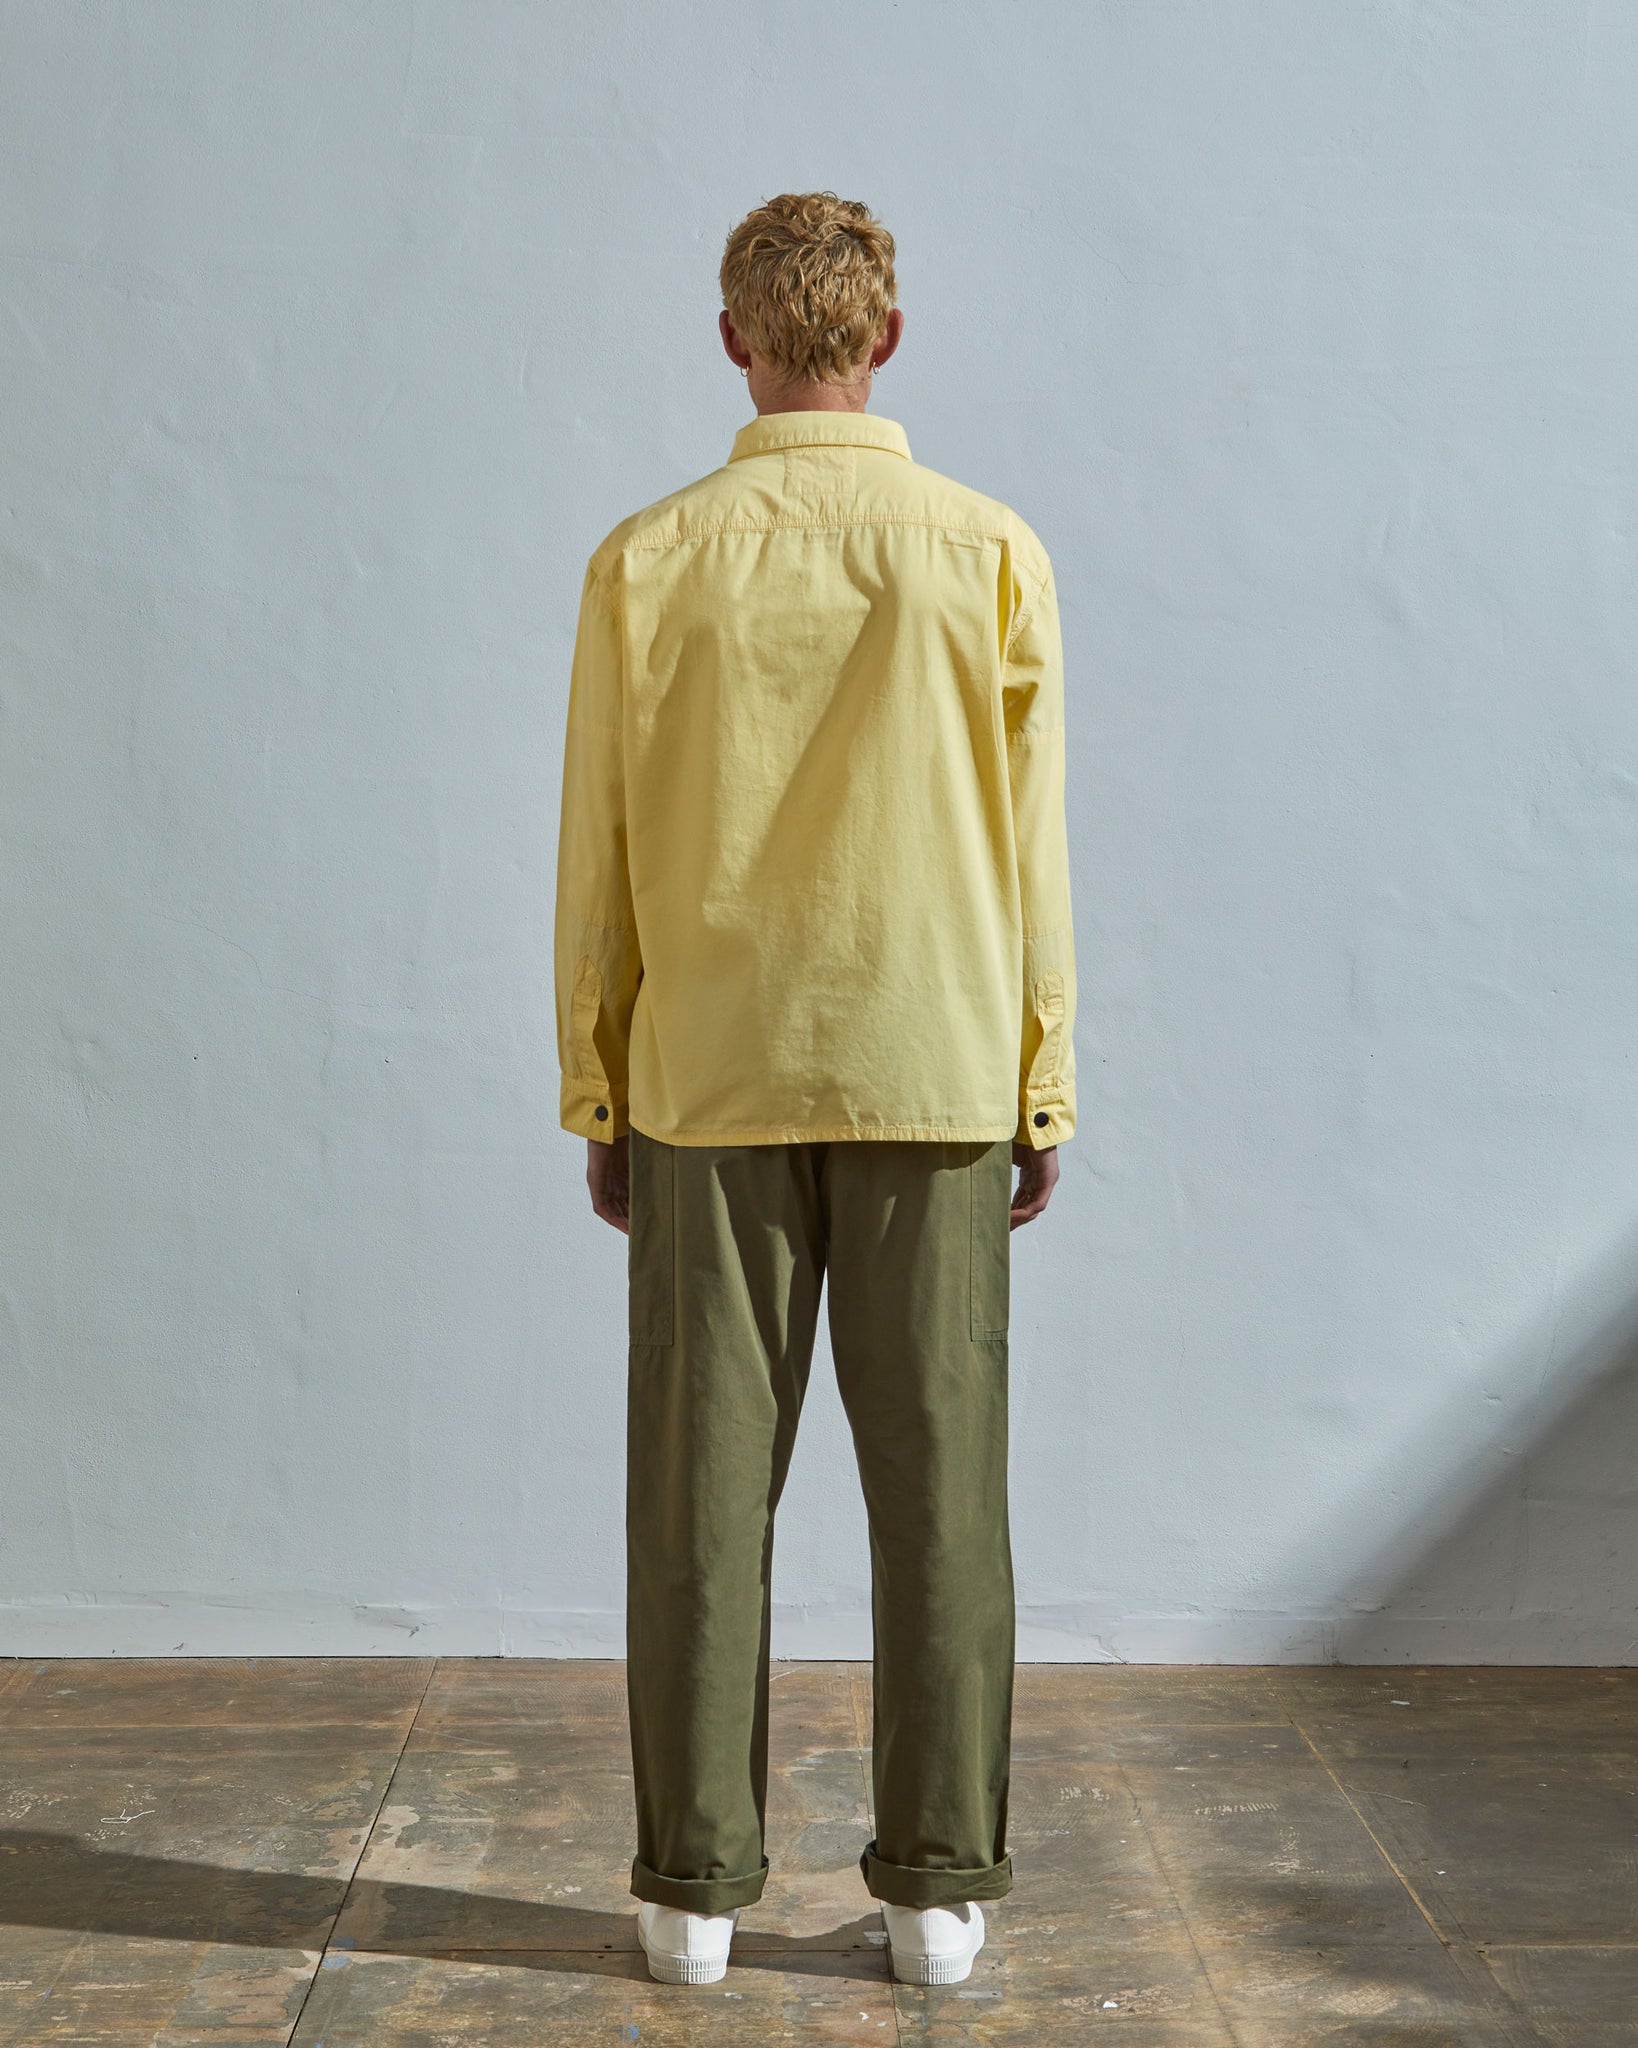 Full-length rear view of model wearing #6001, pale, banana-yellow over shirt showing reinforced elbows.